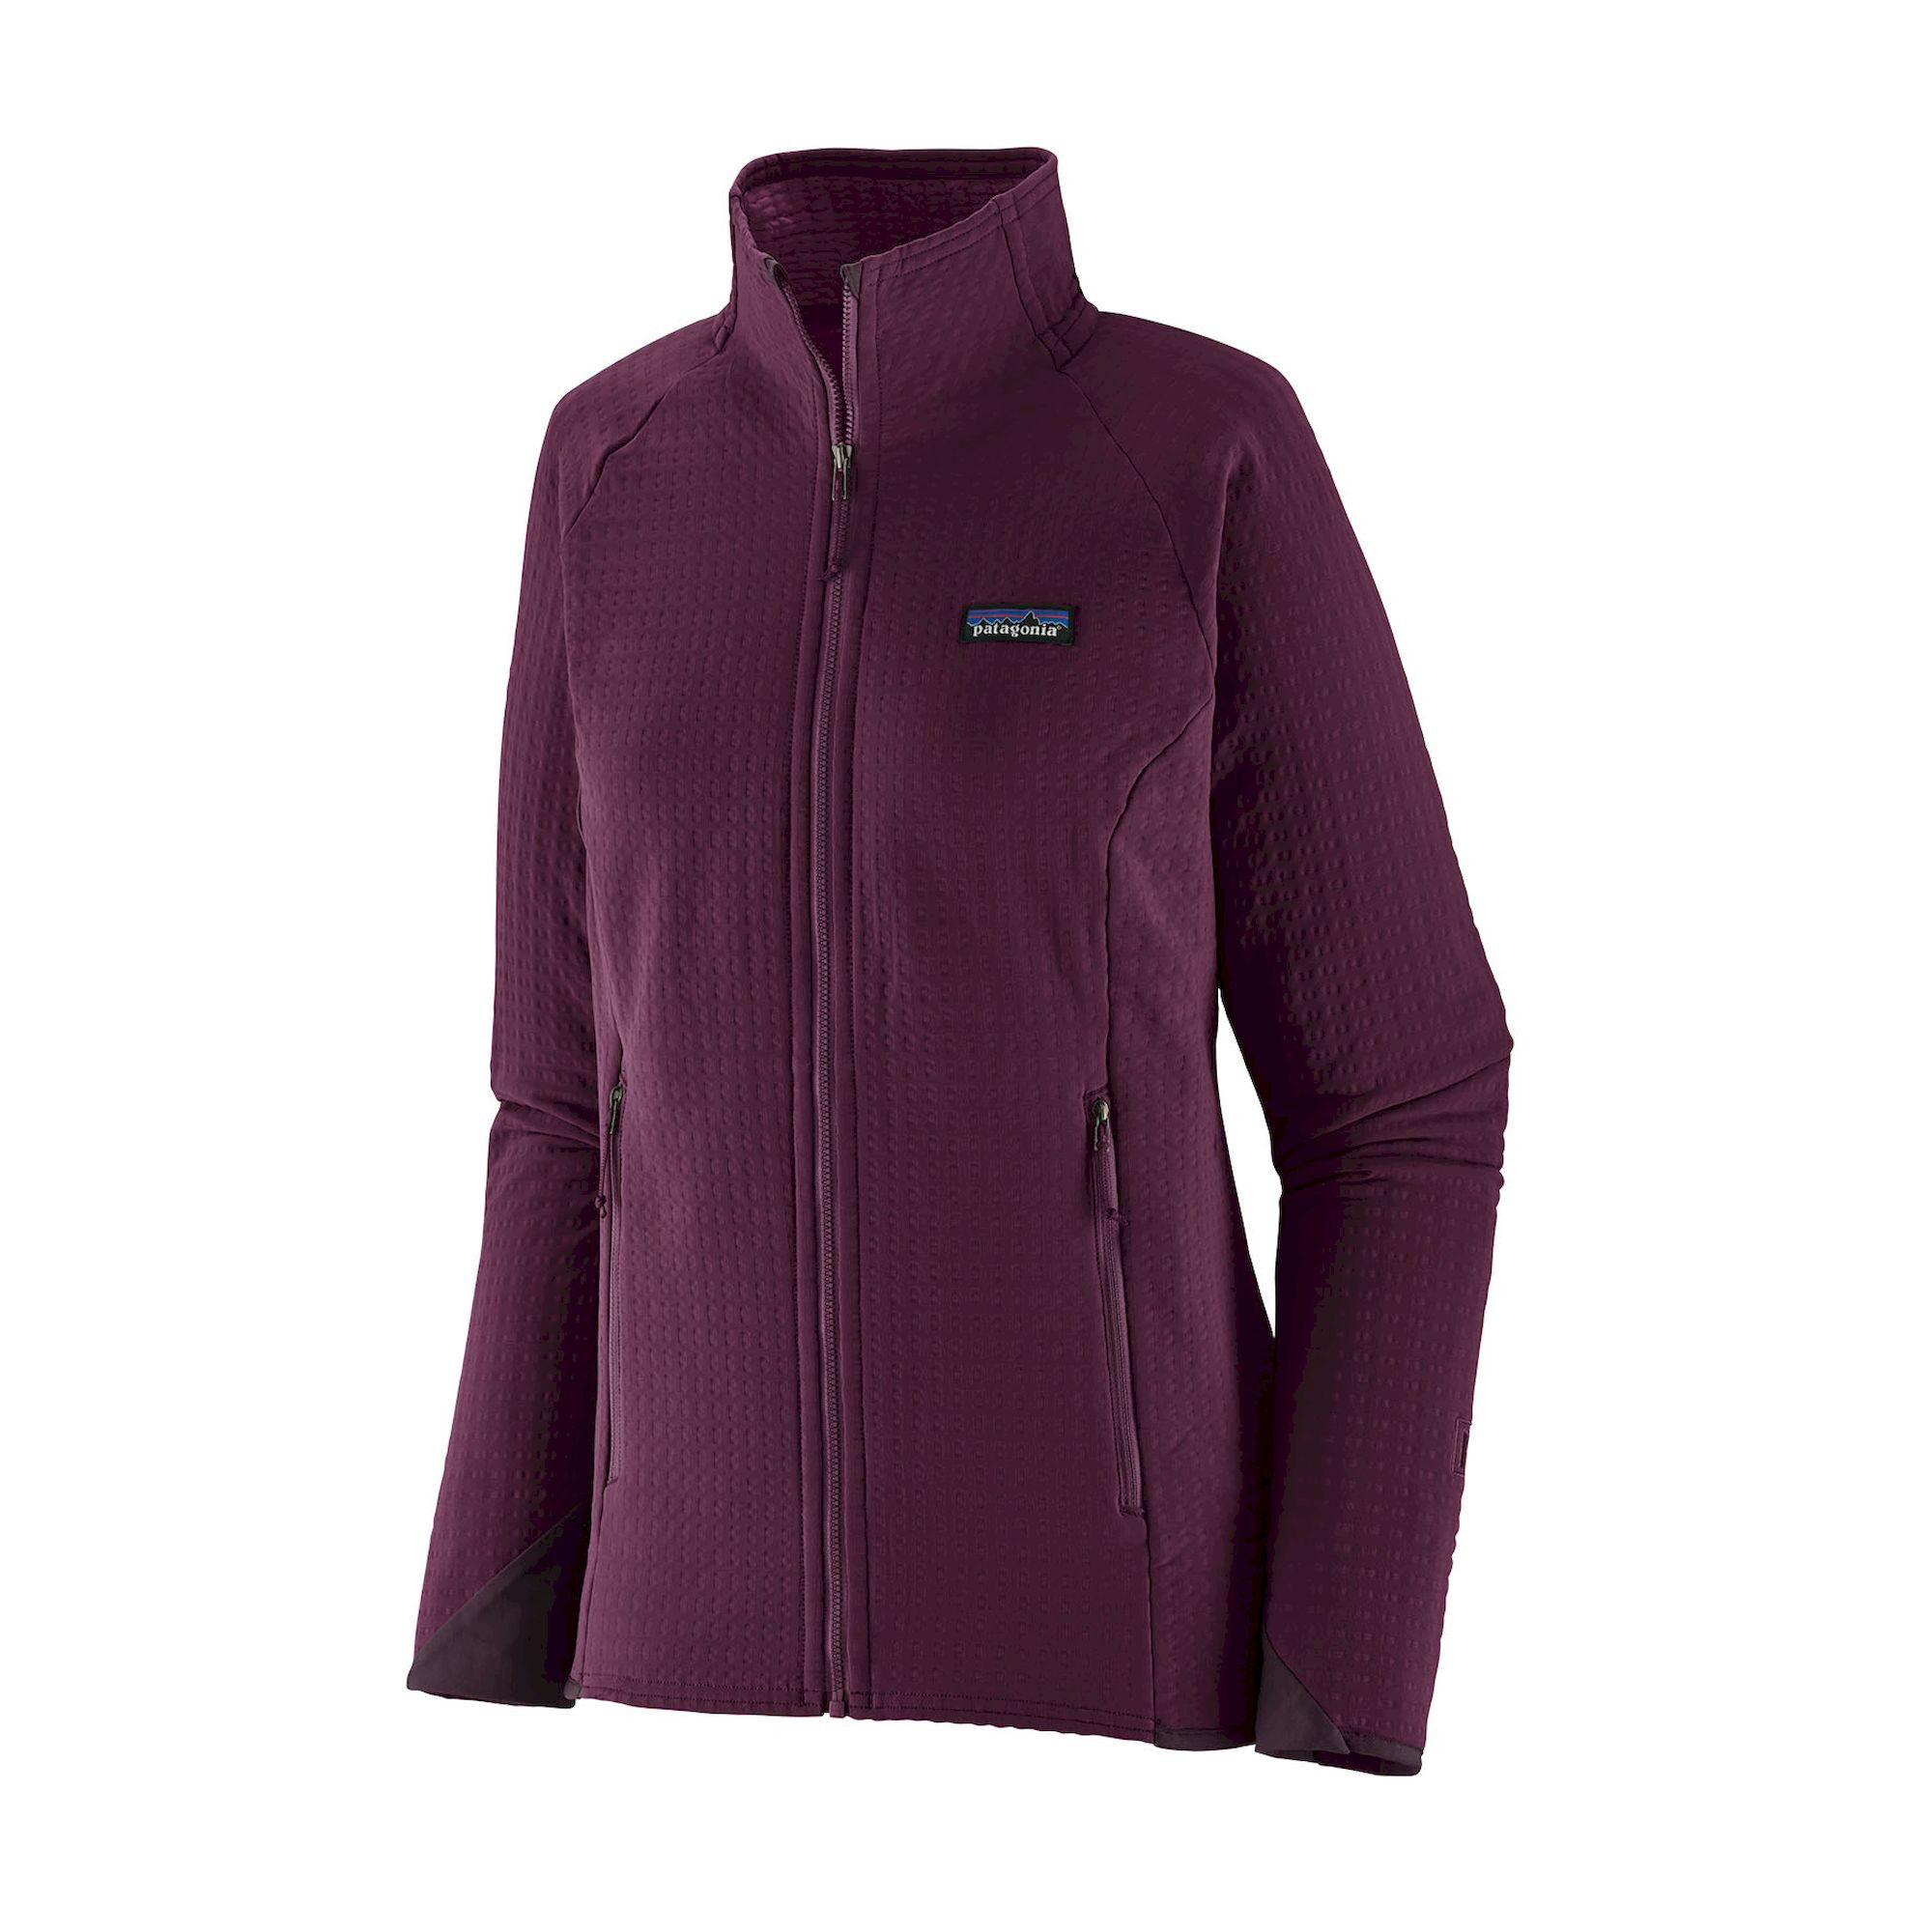 Patagonia - R2 TechFace Jkt - Giacca in pile - Donna